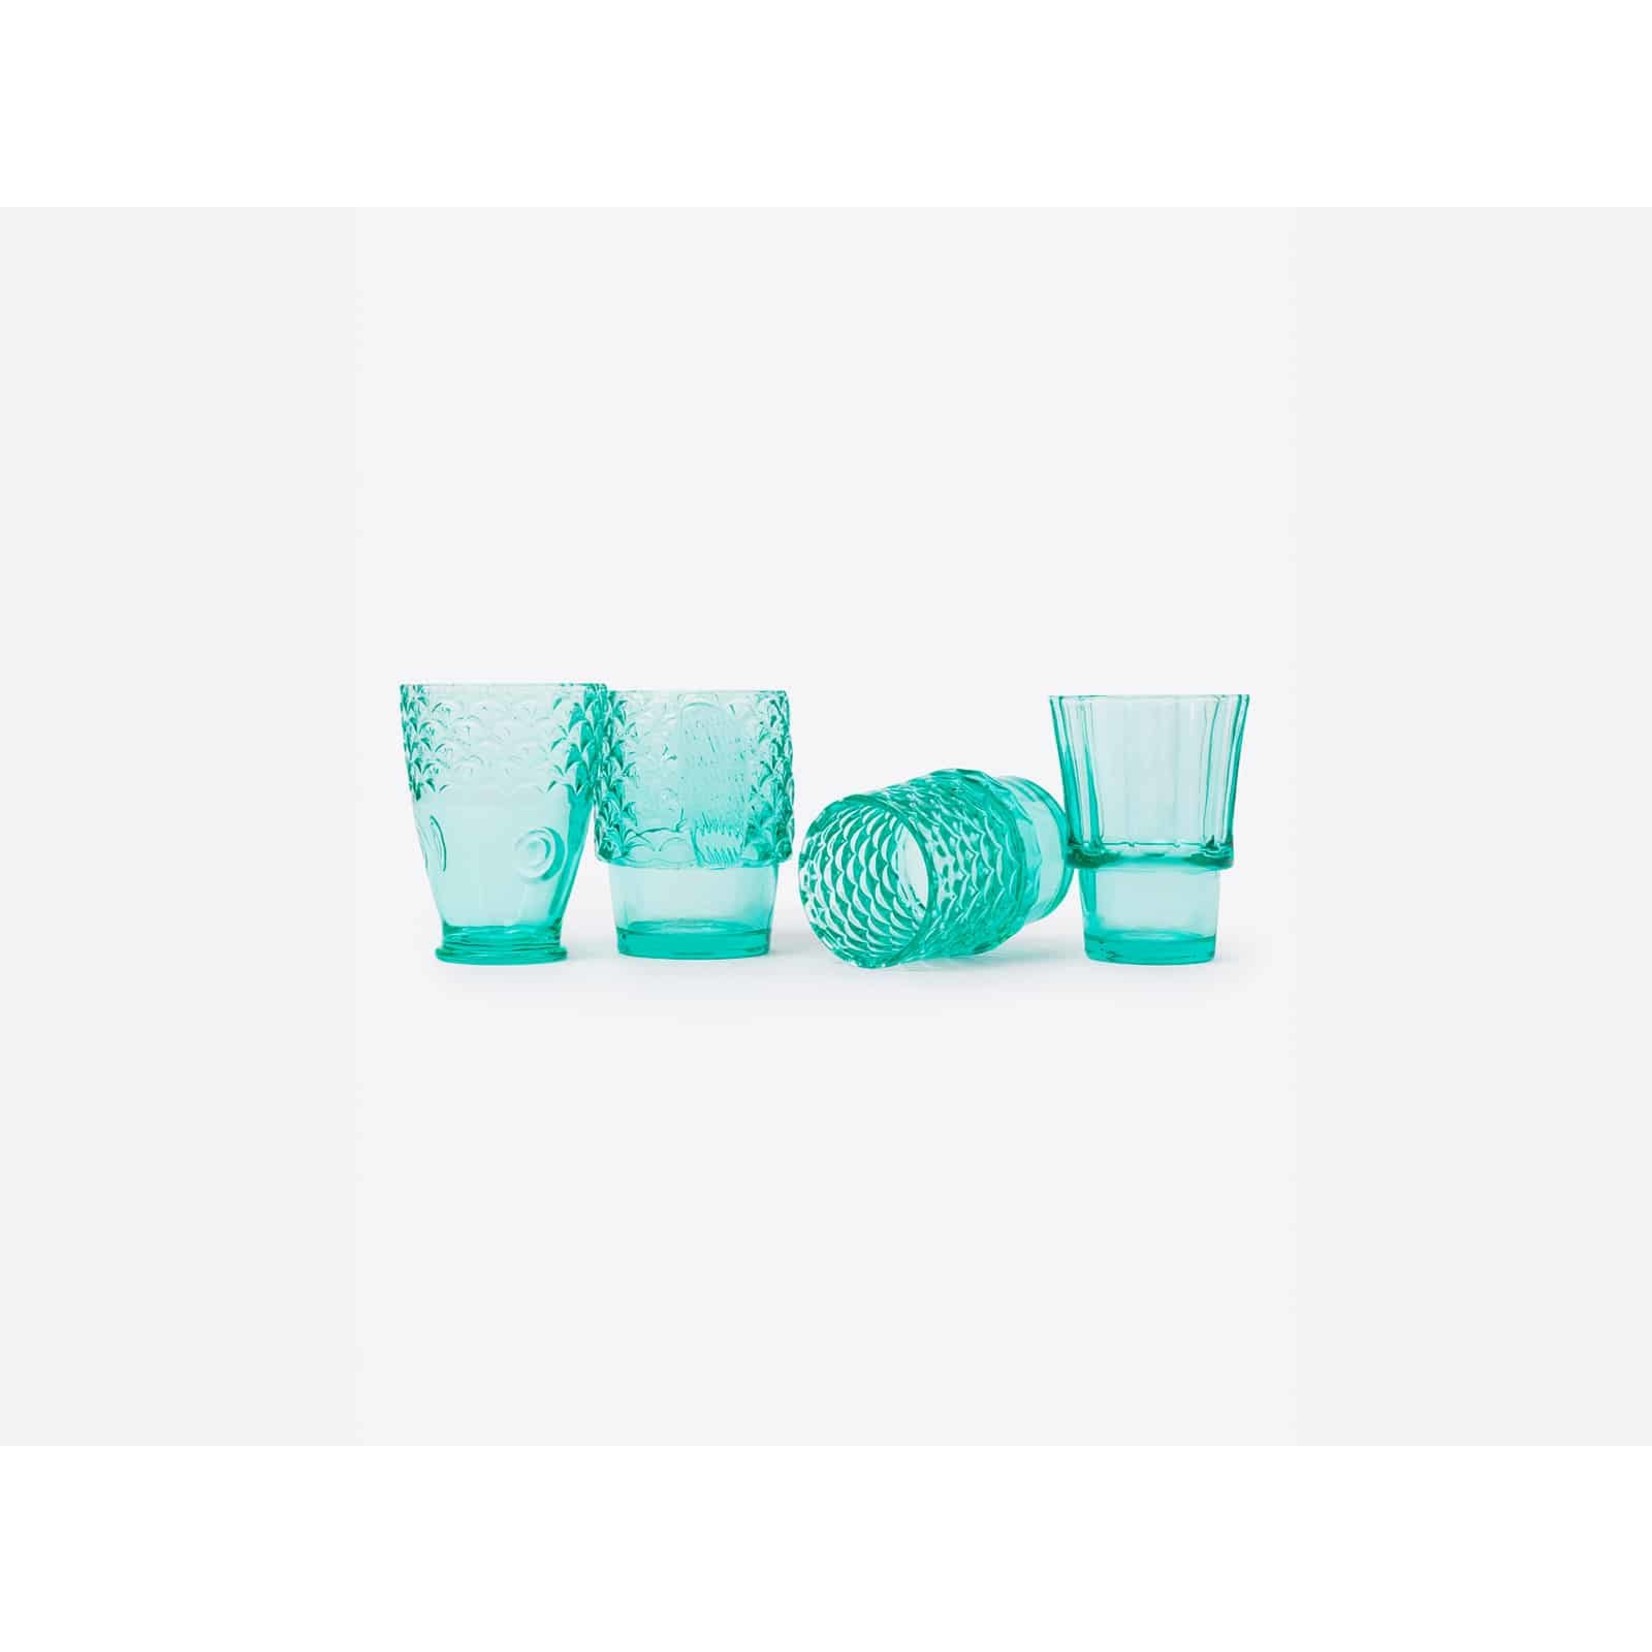 Koifish Stackable Drinking Glasses in Mint